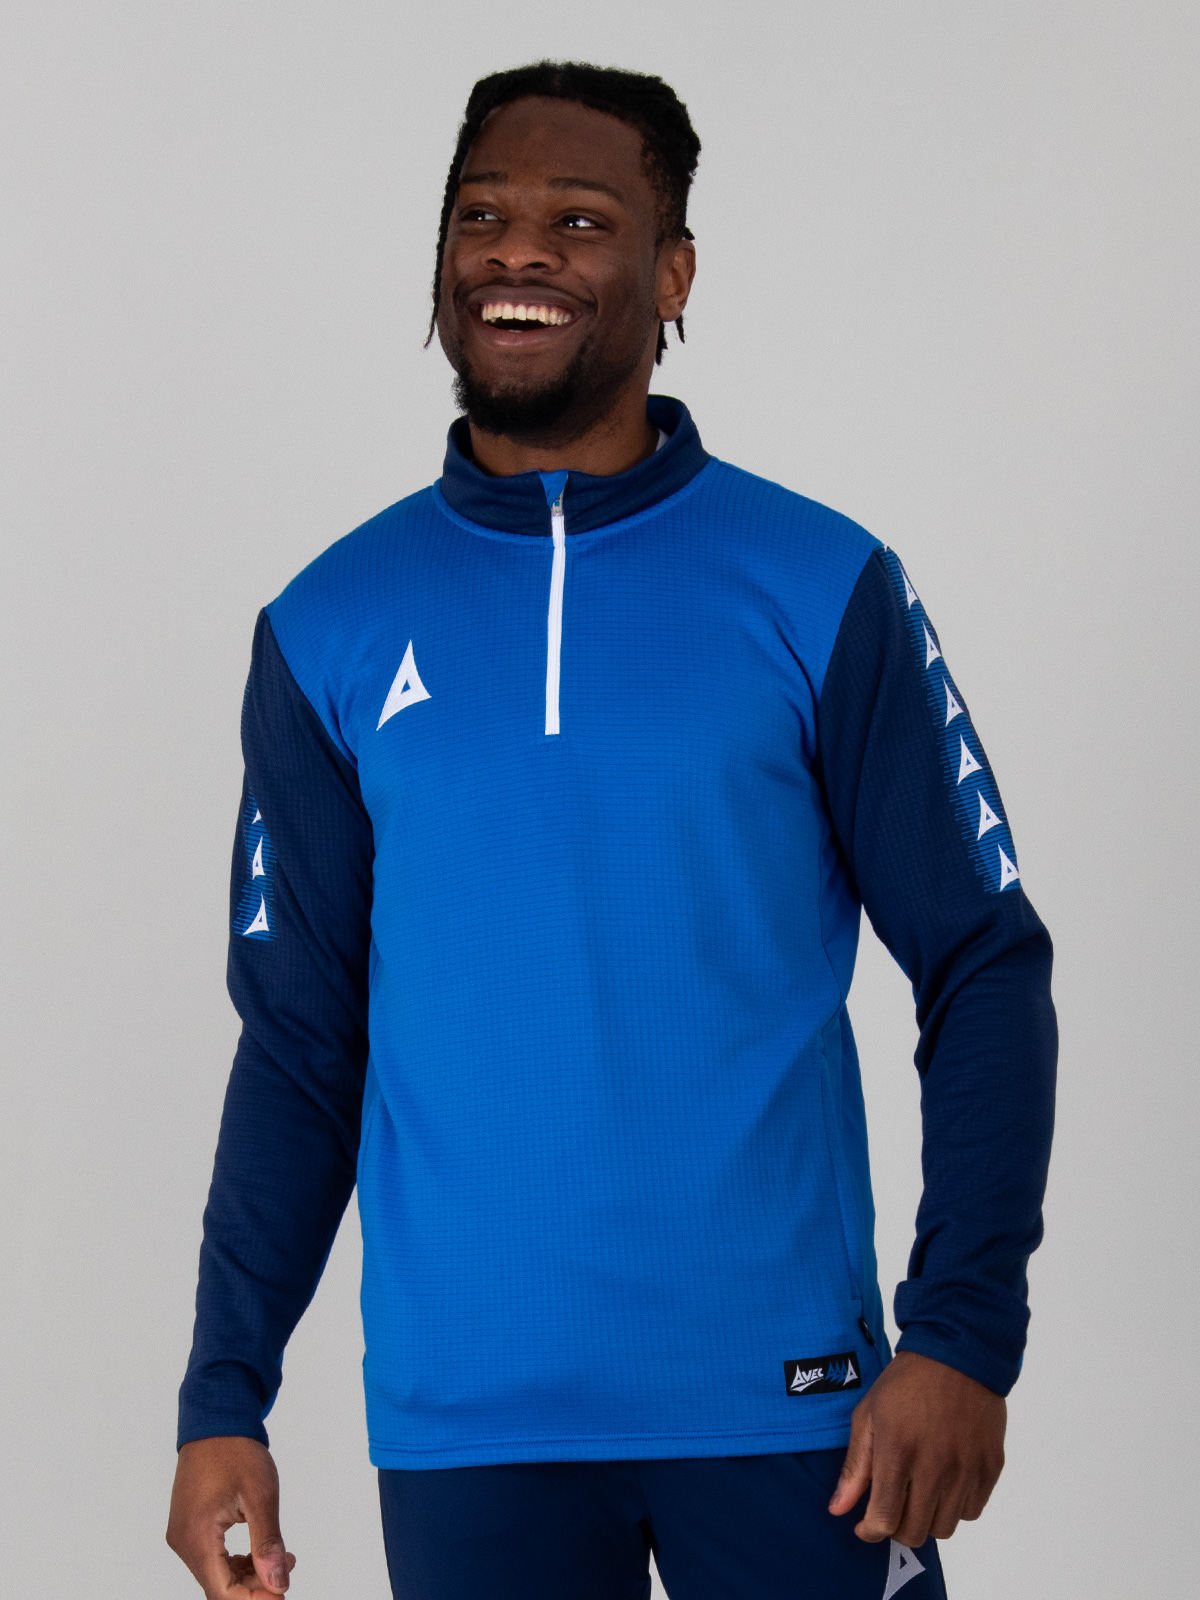 this royal blue and navy jumper is being worn by a man. the jumper has a white quarter zip design and navy funnel neck